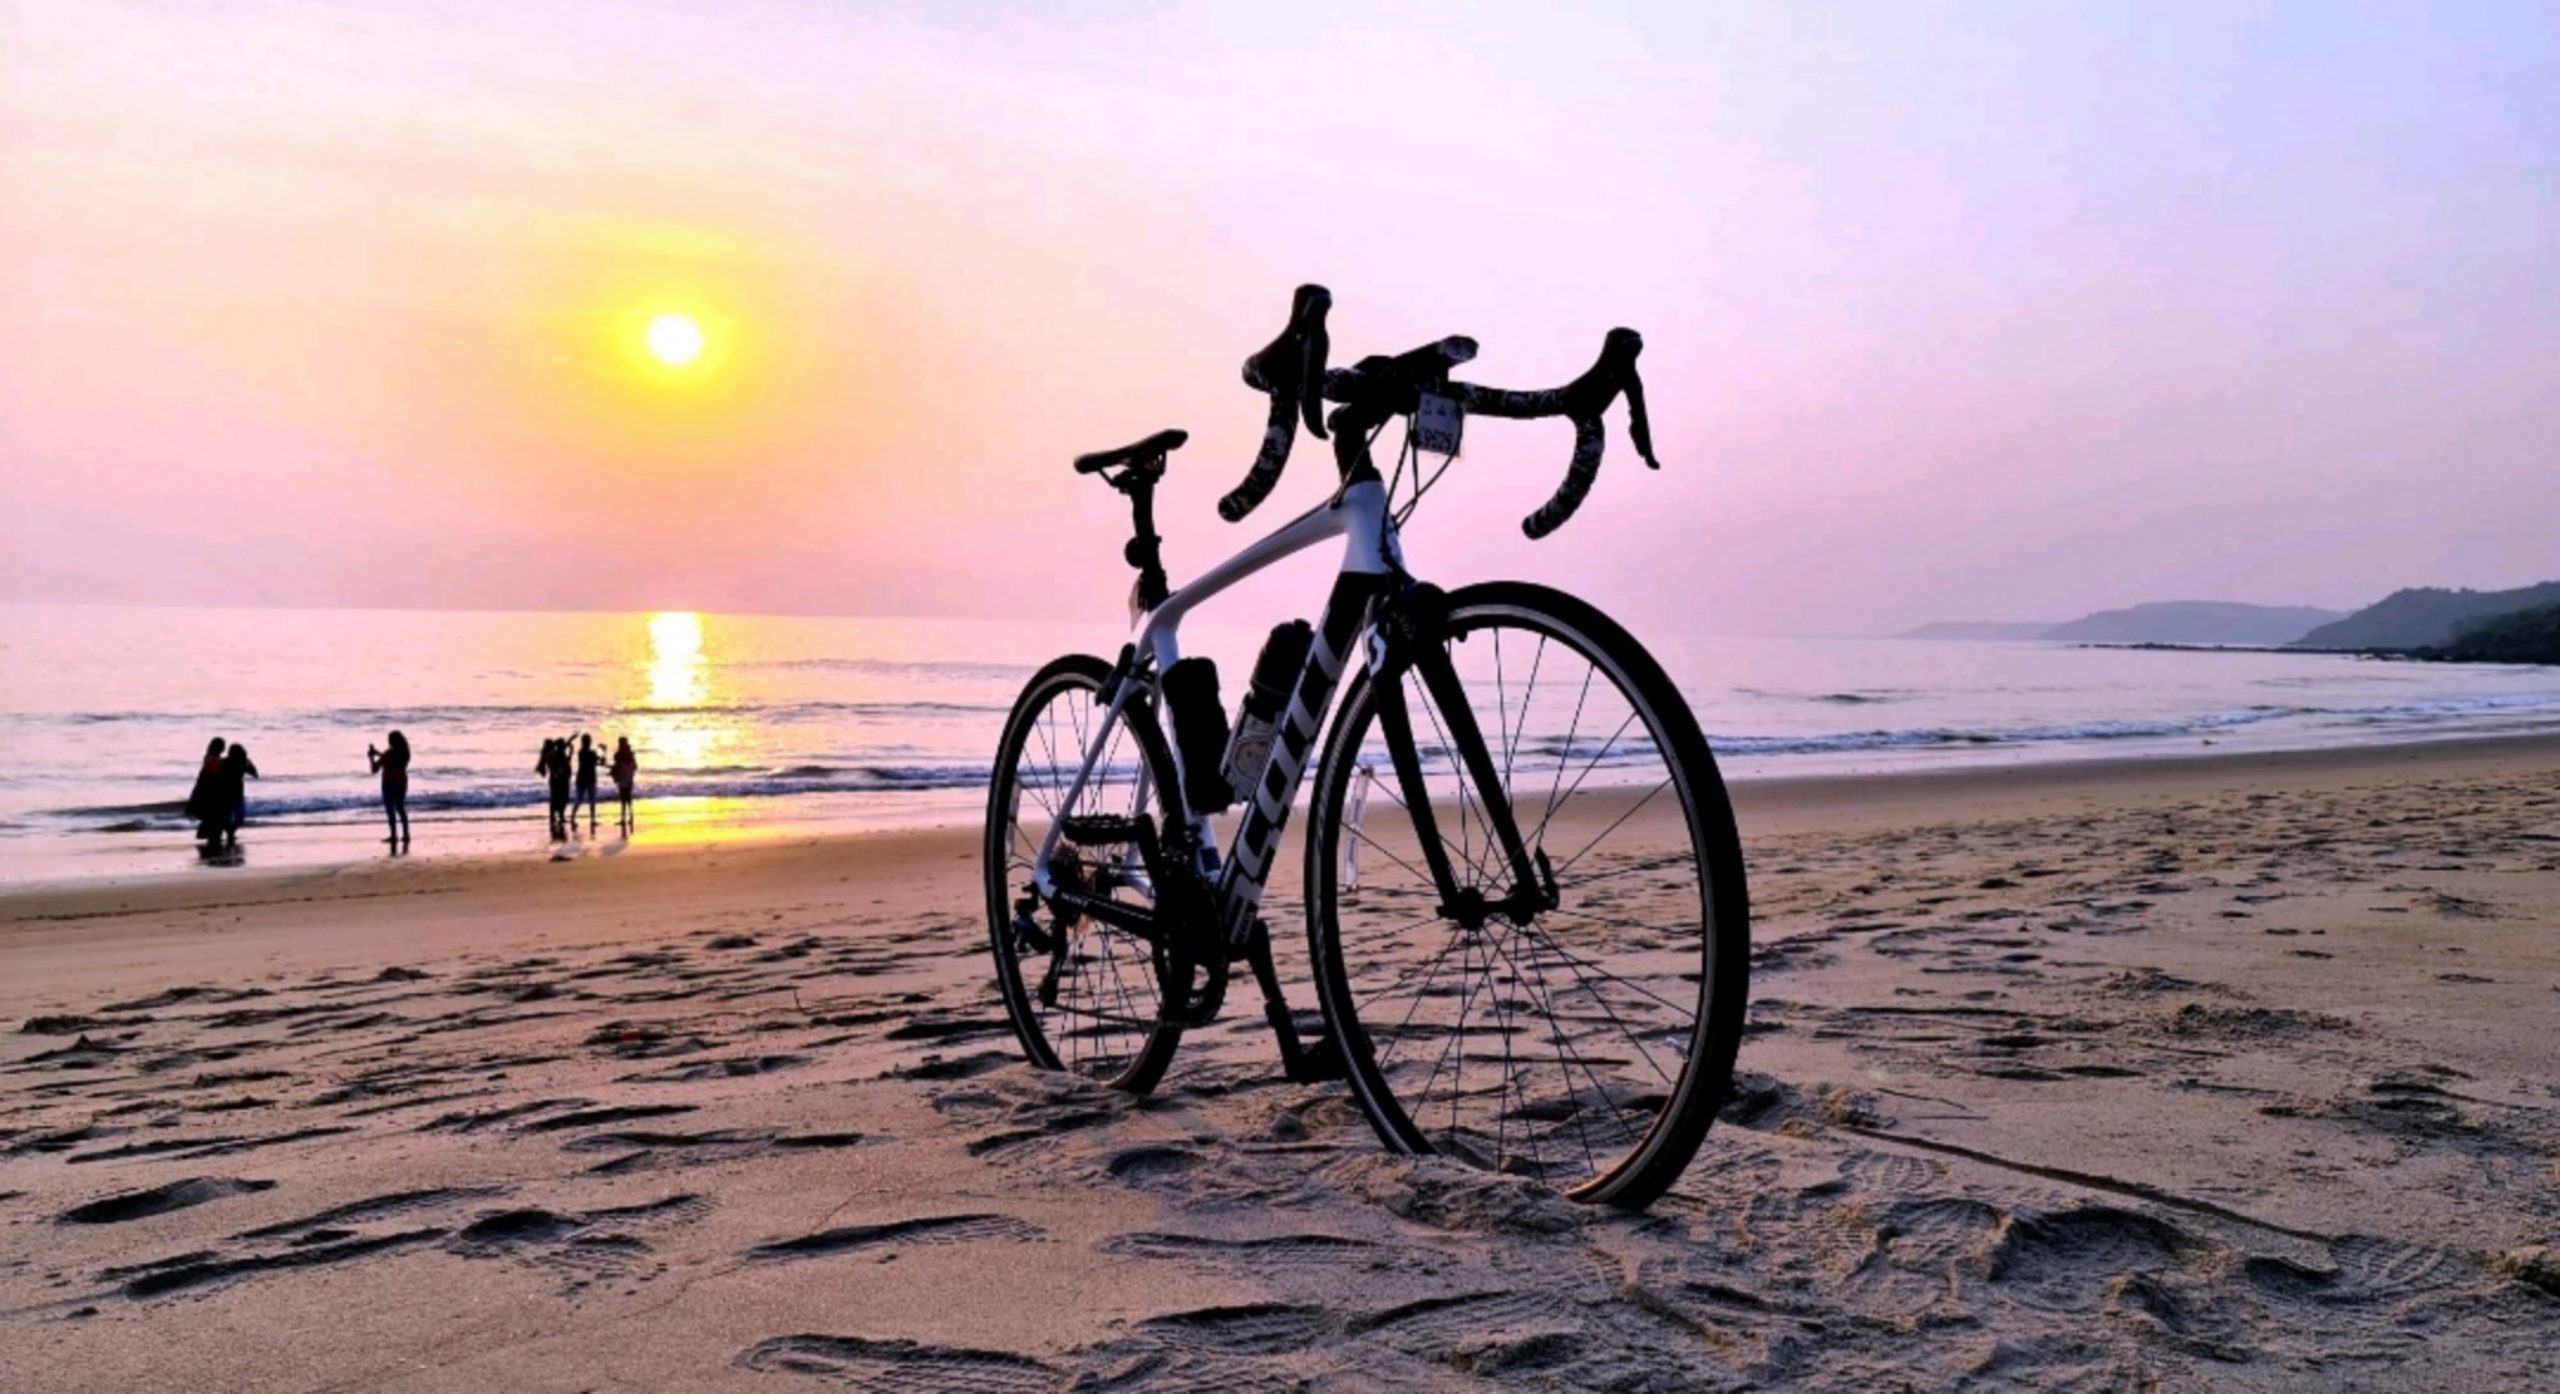 A bicycle and sunset at a beach